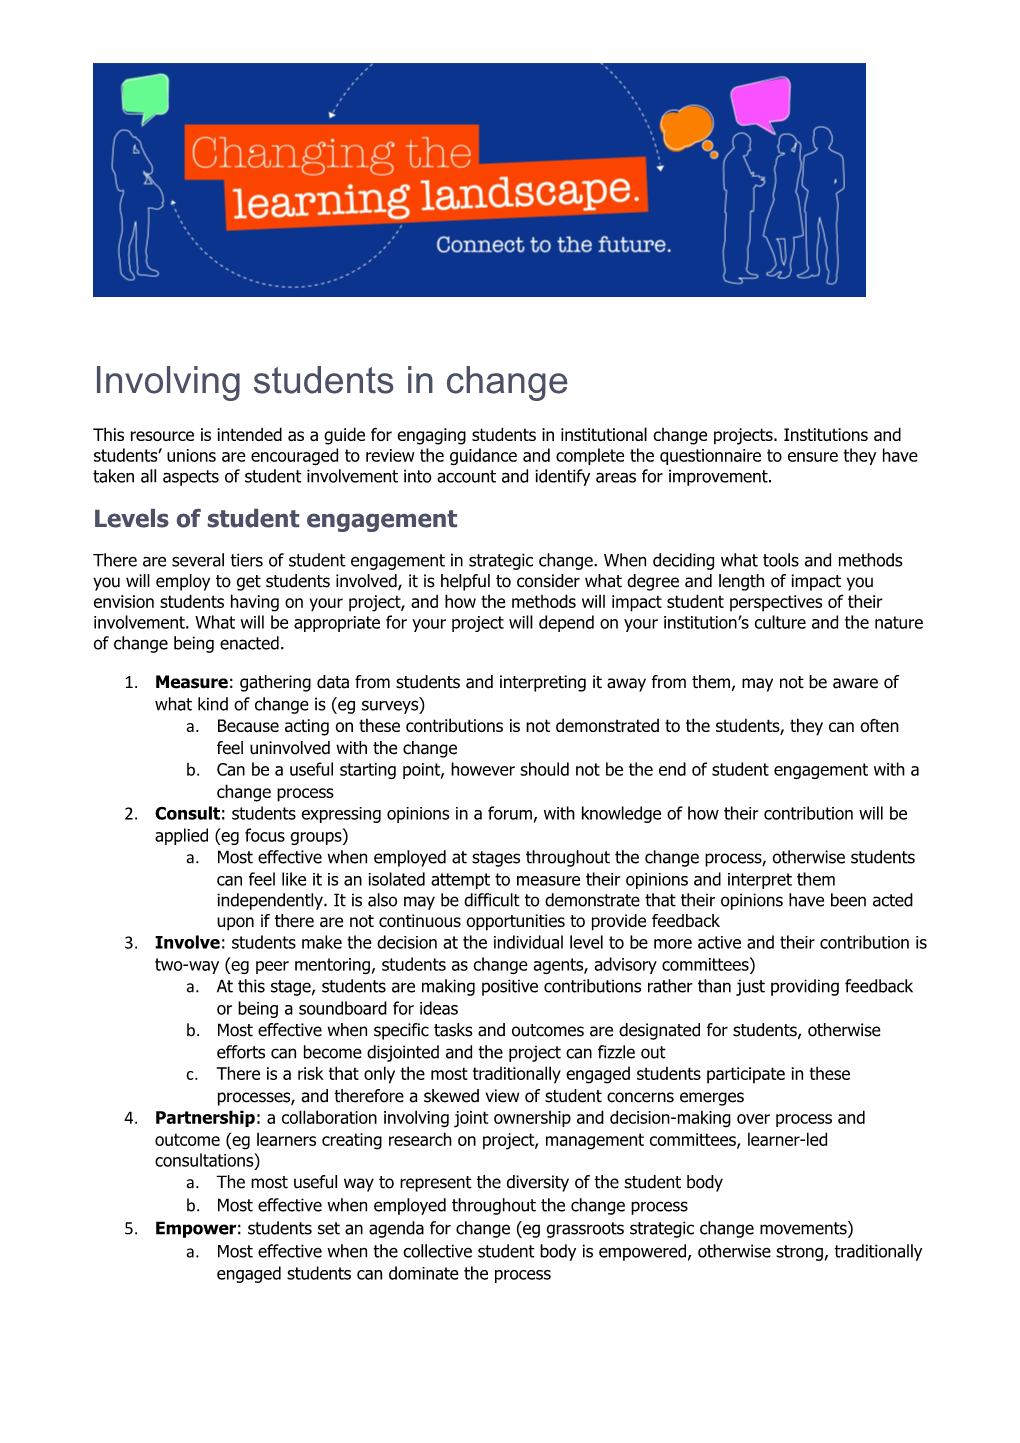 Levels of Student Engagement